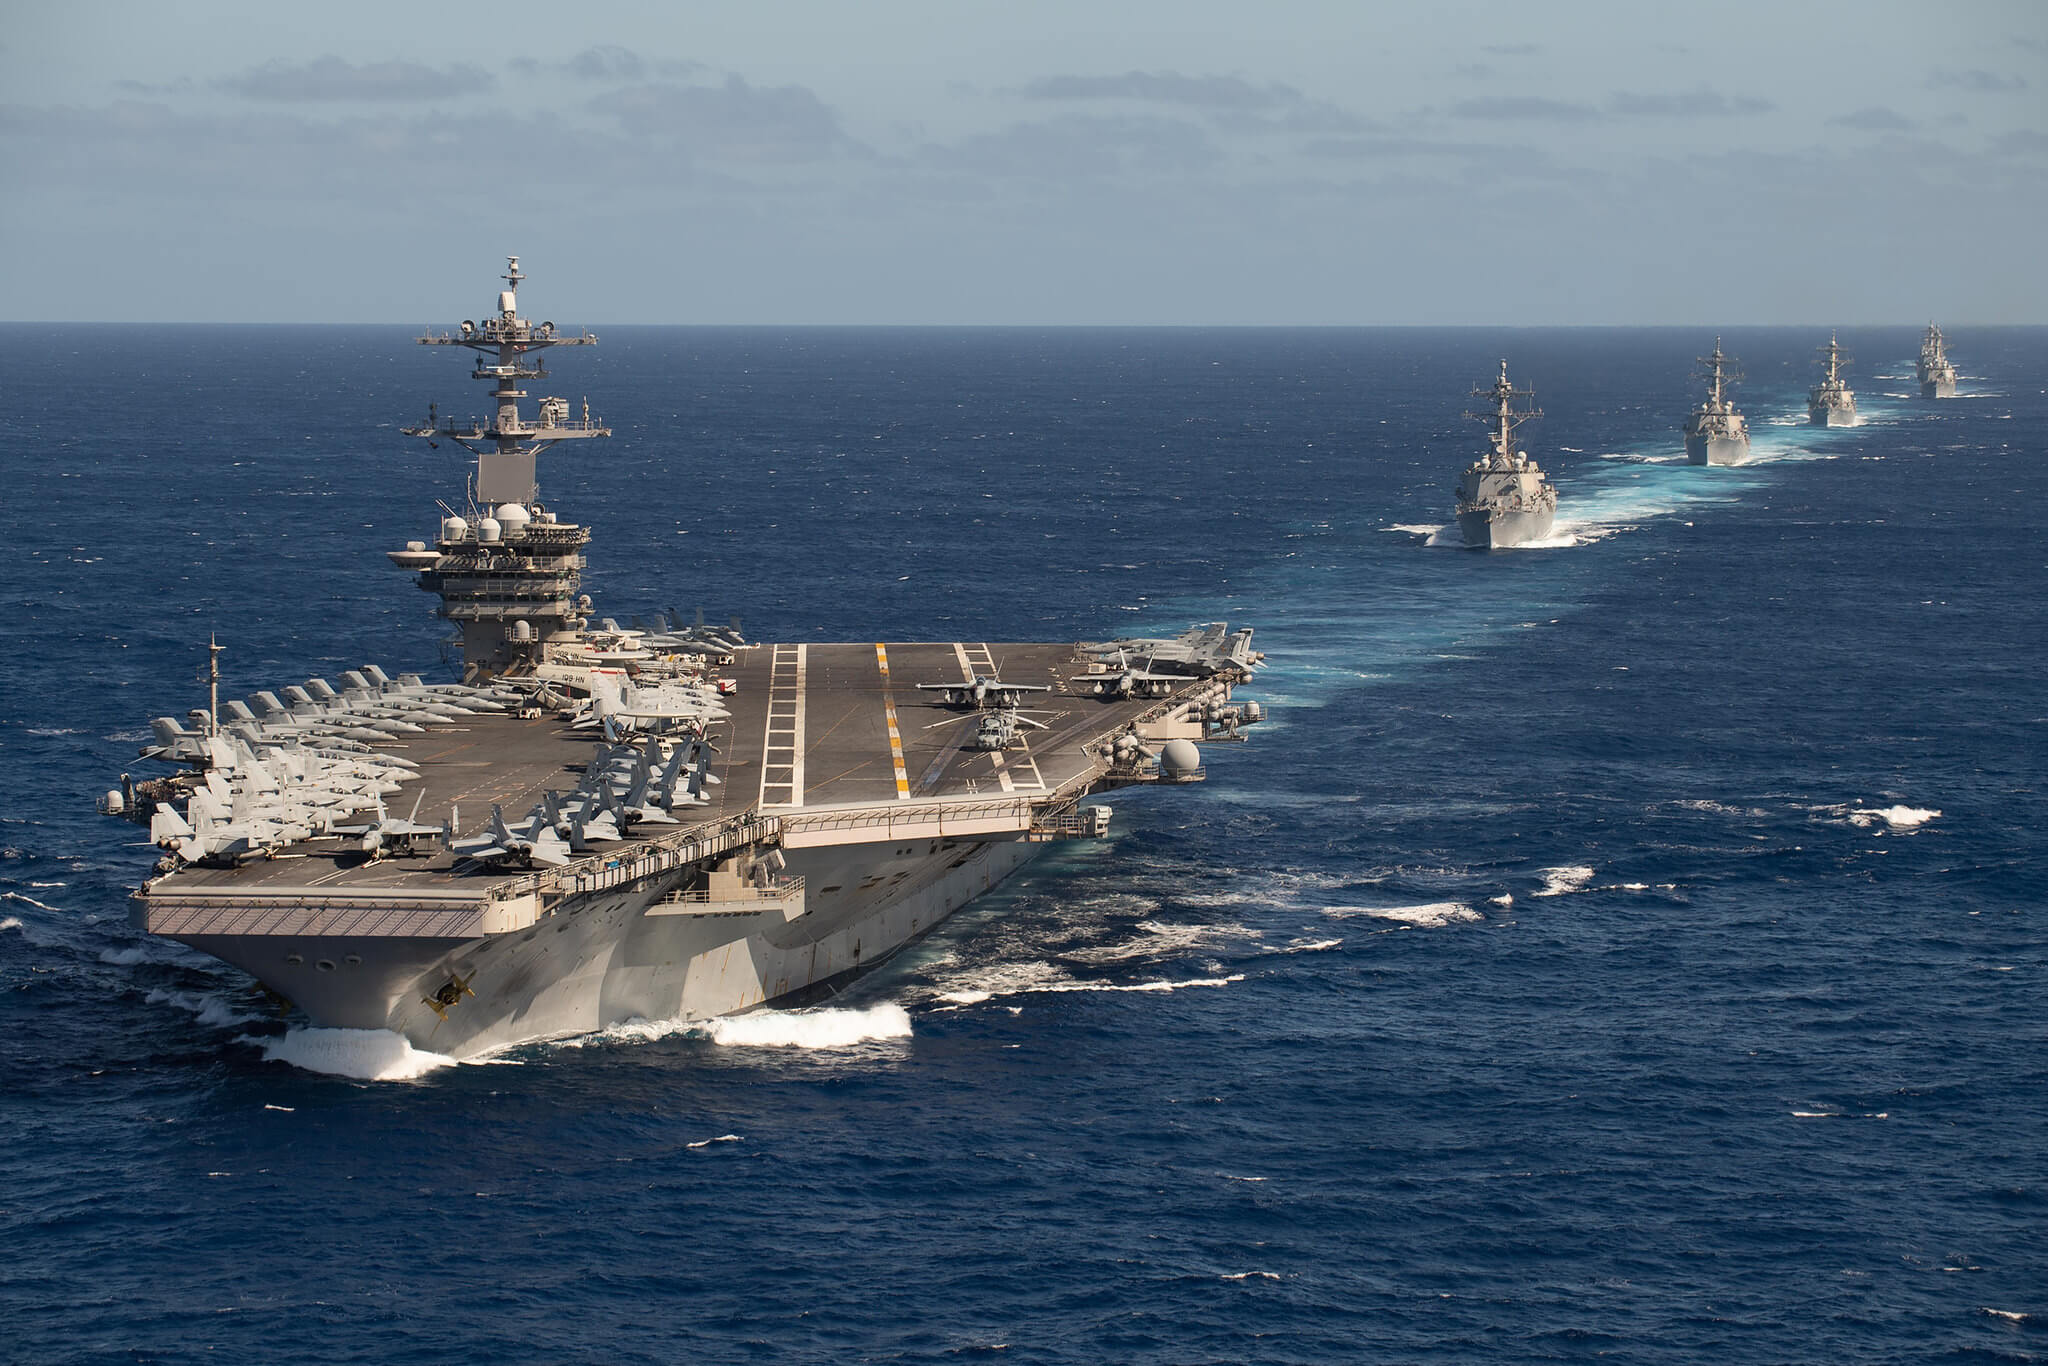 The Theodore Roosevelt Carrier Strike Group transits in formation through the Indo-Pacific in January 2020. © U.S. Indo-Pacific Command 